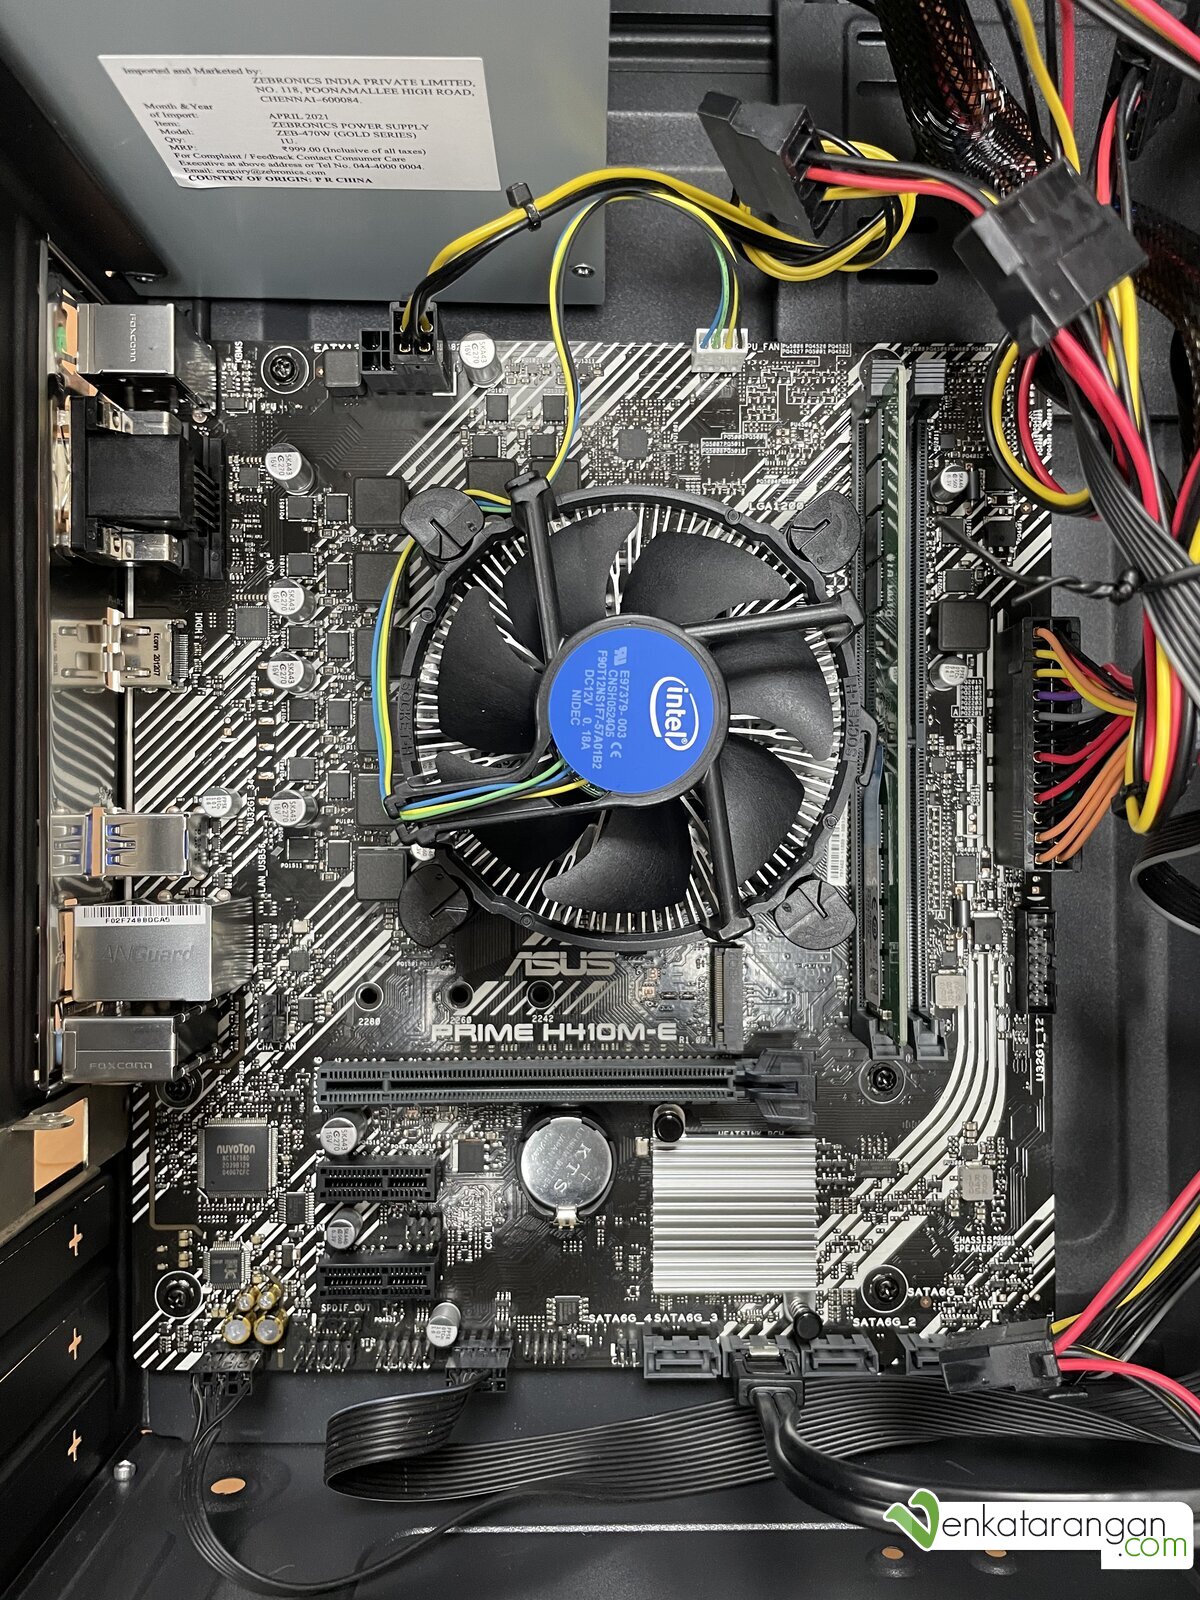 Closeup view of Intel Core i5 10400 on an ASUS Prime H410M-E Motherboard with Intel Graphics 630.